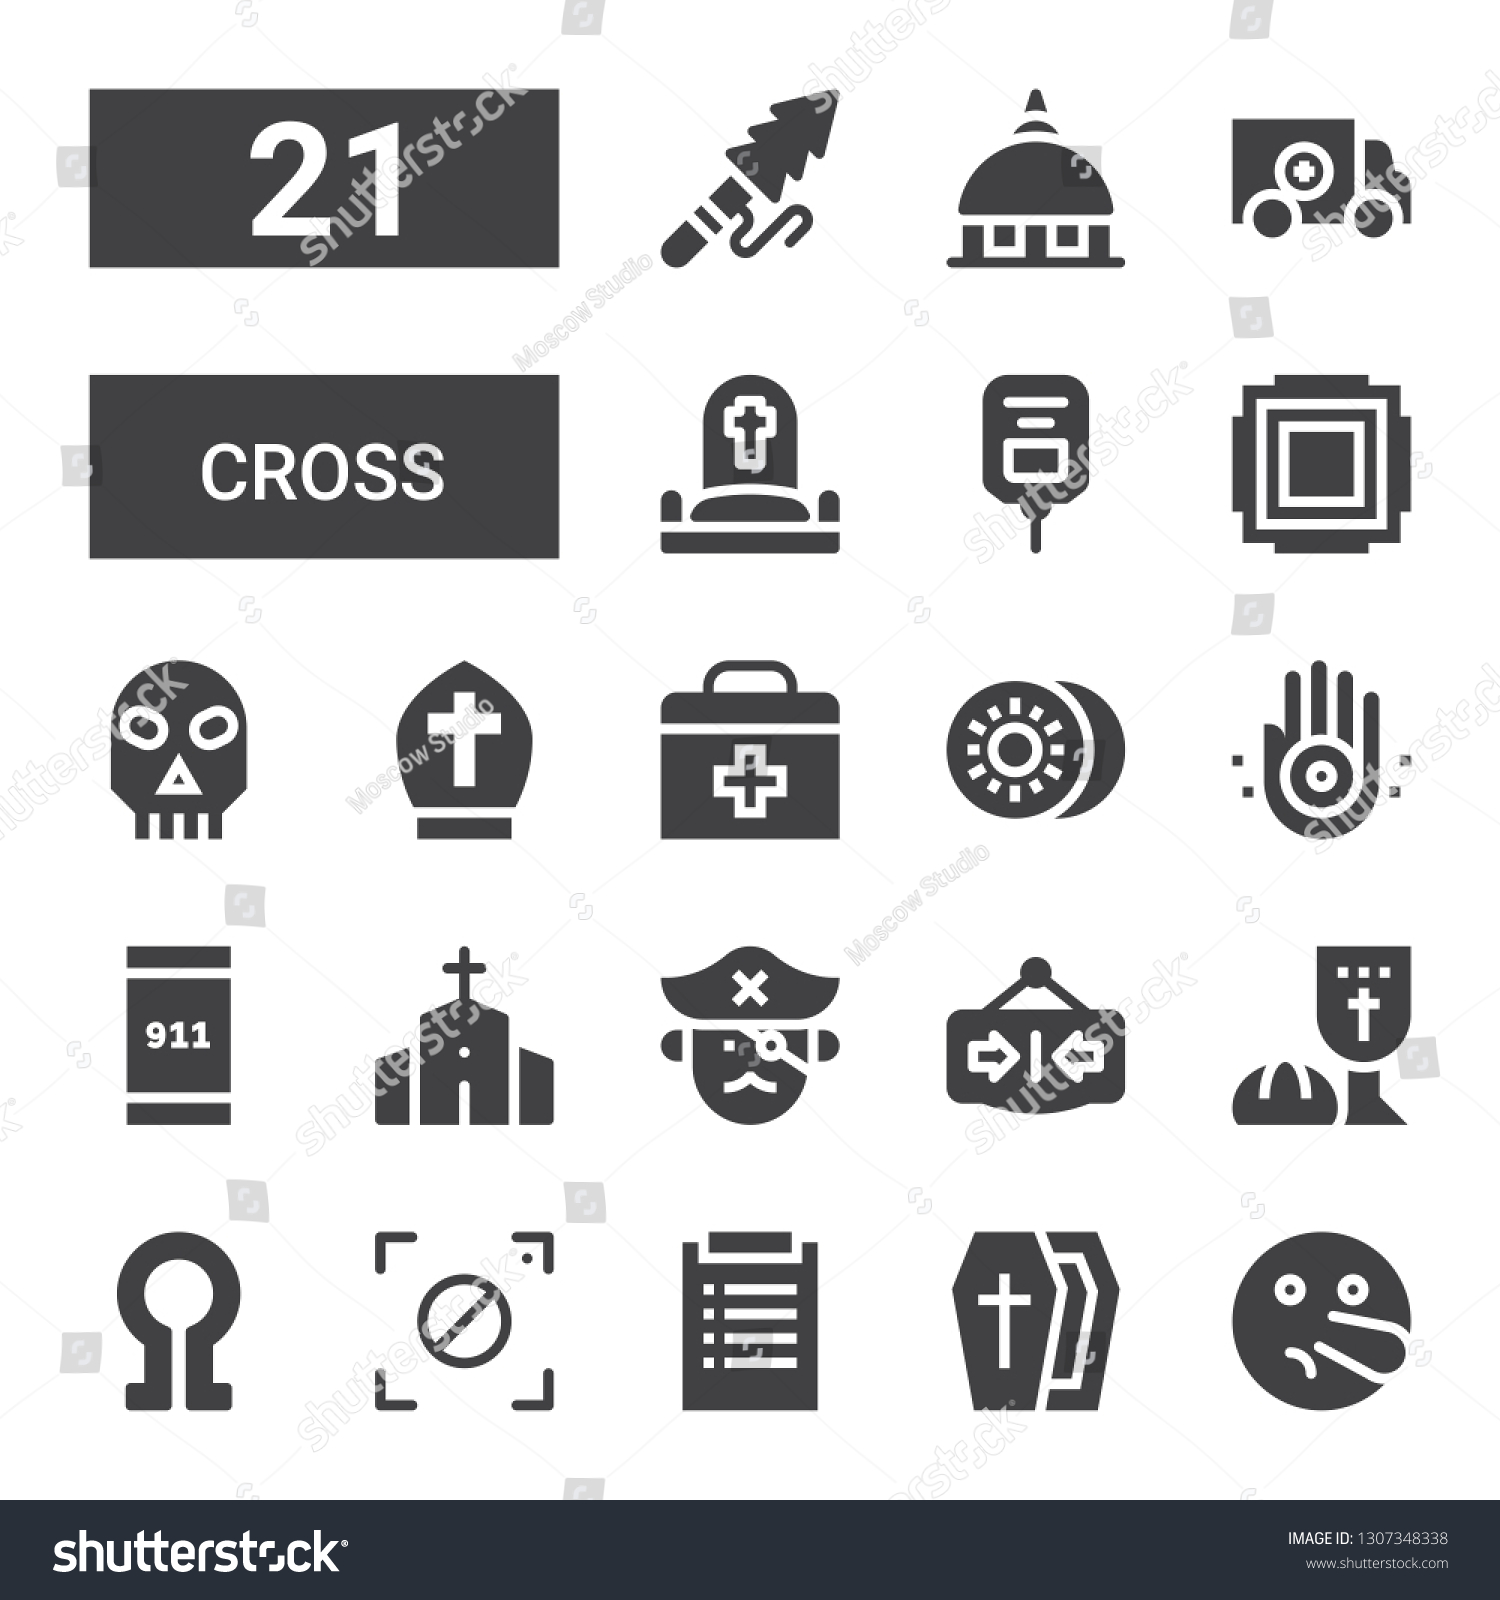 SVG of cross icon set. Collection of 21 filled cross icons included Liar, Coffin, Diagnosis, Focus, Death, Last supper, Close, Pirate, Chapel, Emergency call, Jainism, Kiwi, First aid svg